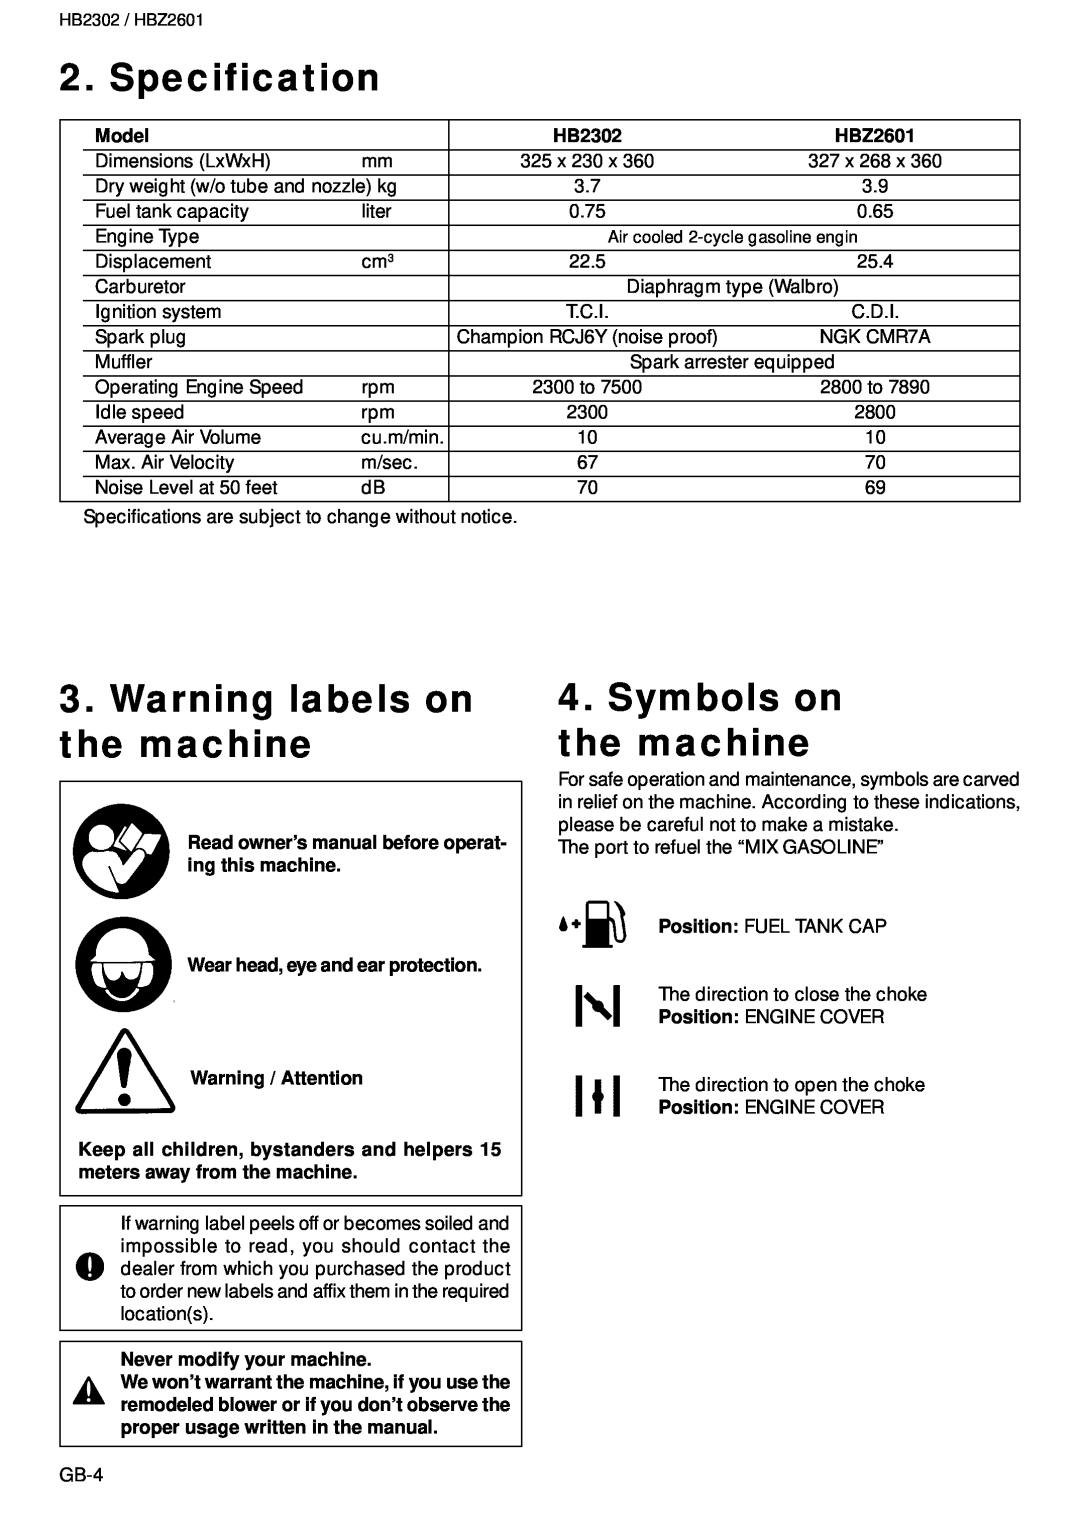 Zenoah HBZ2601 Specification, Warning labels on the machine, Symbols on the machine, Model, HB2302, Warning / Attention 